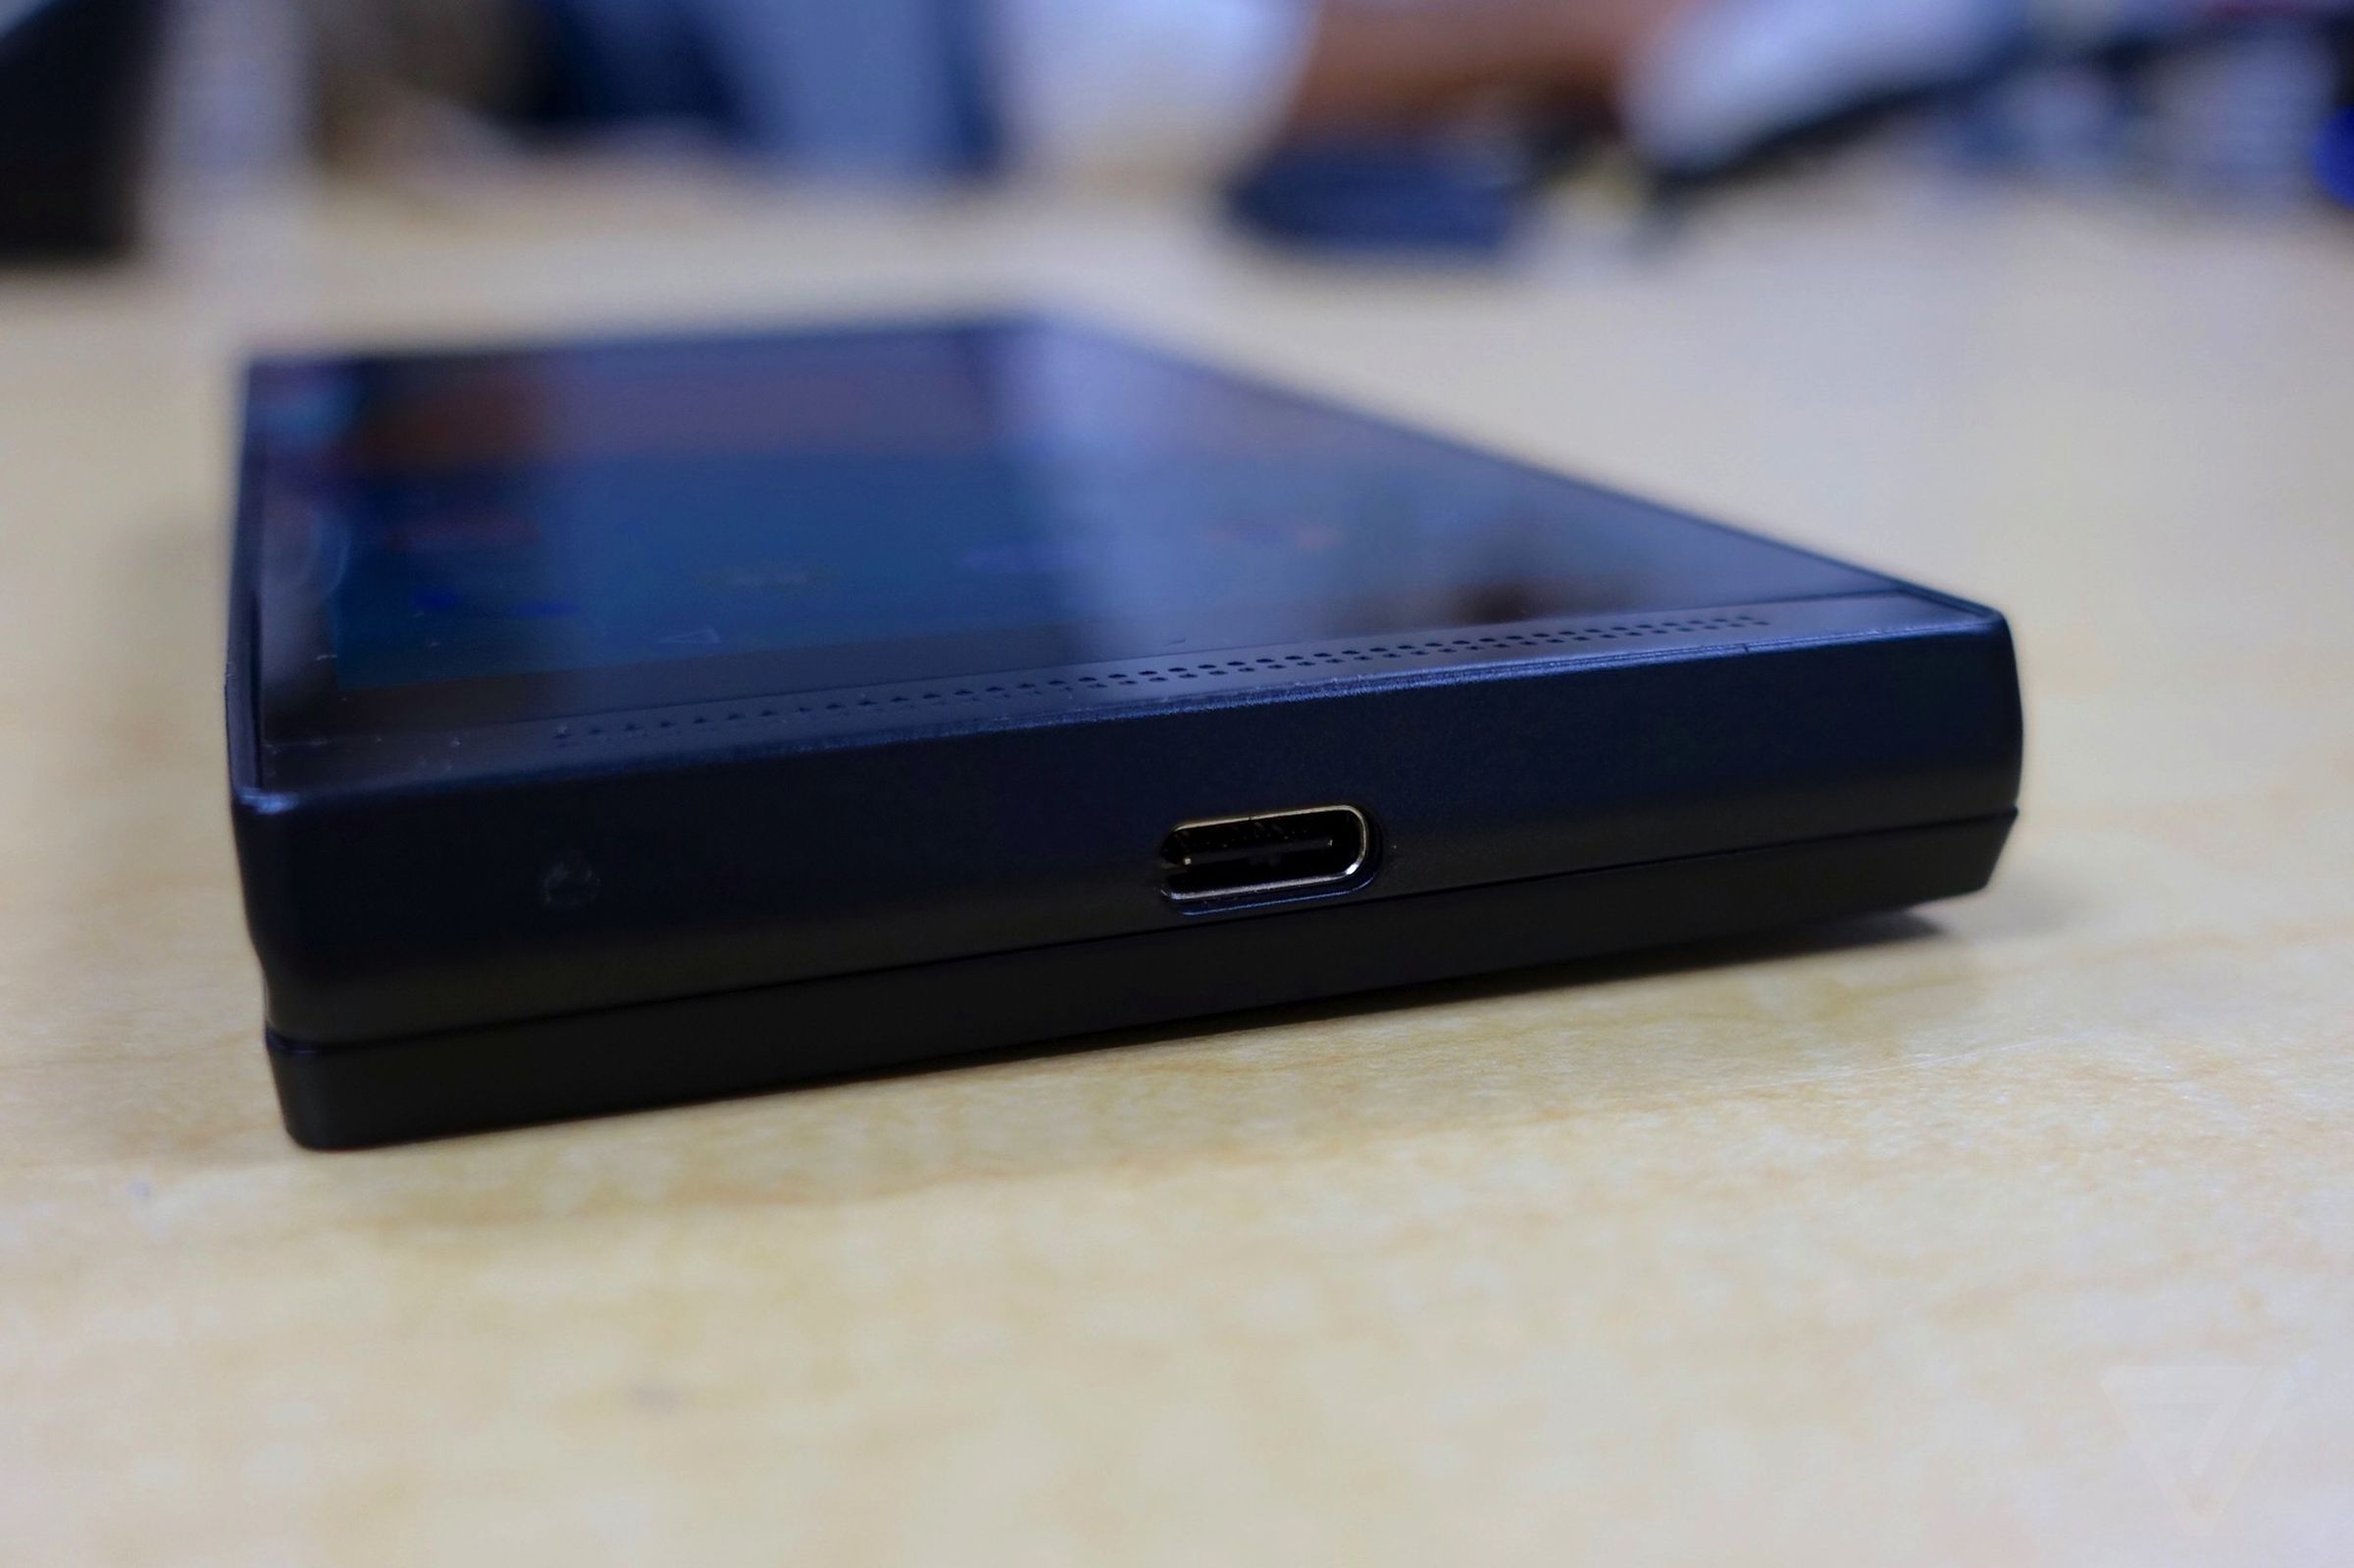 Project Ara hands-on photos